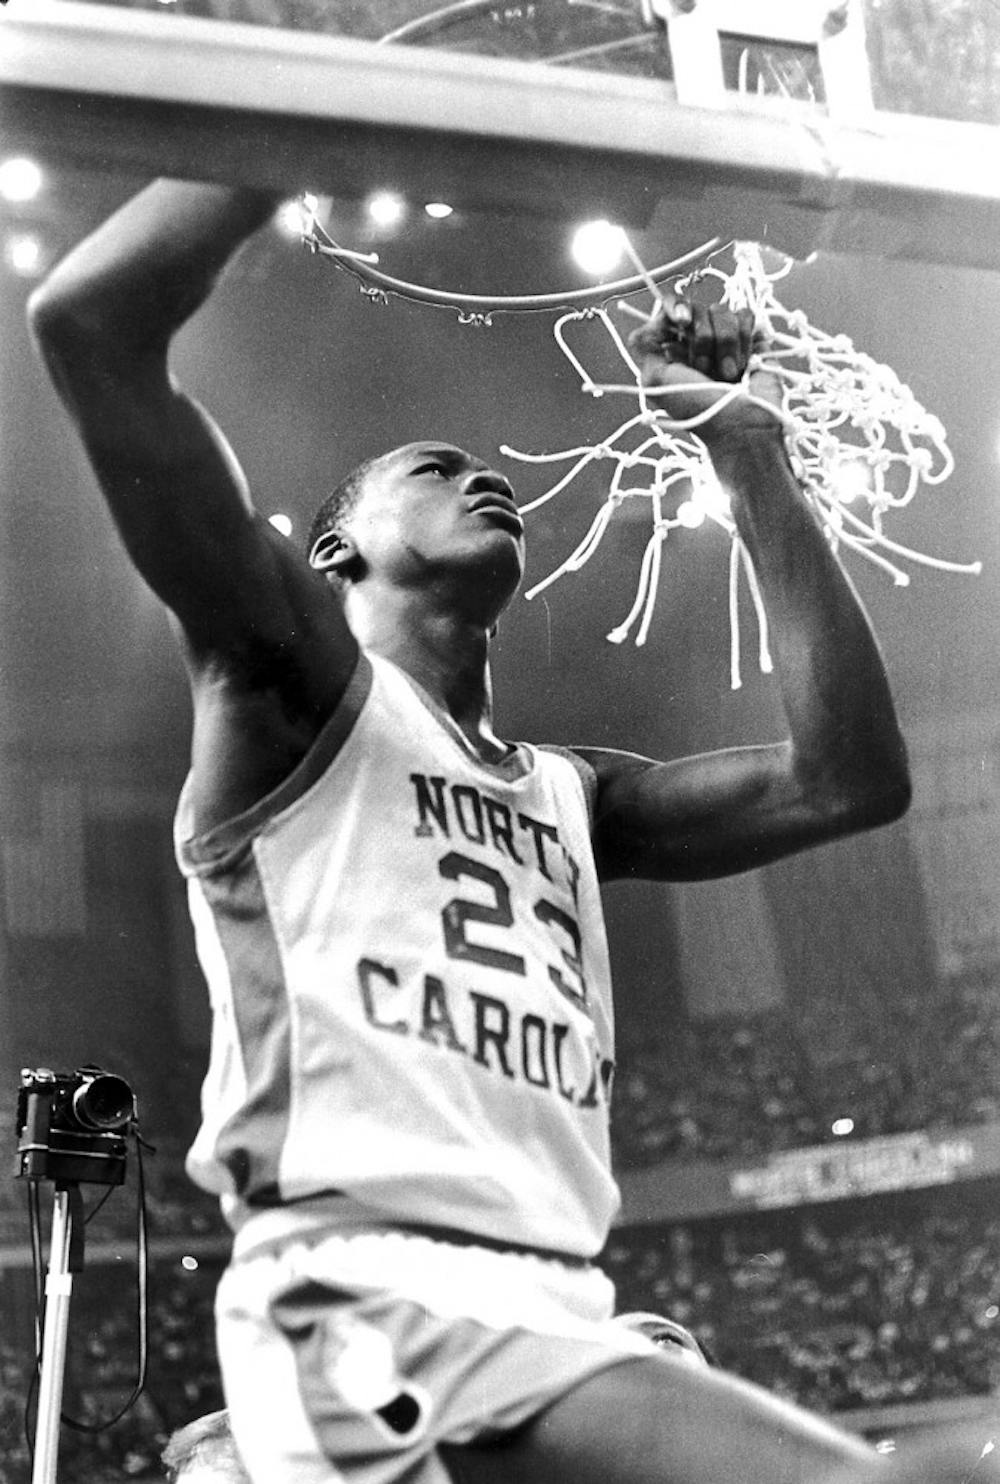 Michael Jordan helps cut down the nets after the 1982 NCAA National Championship. Courtesy of UNC Athletic Communications